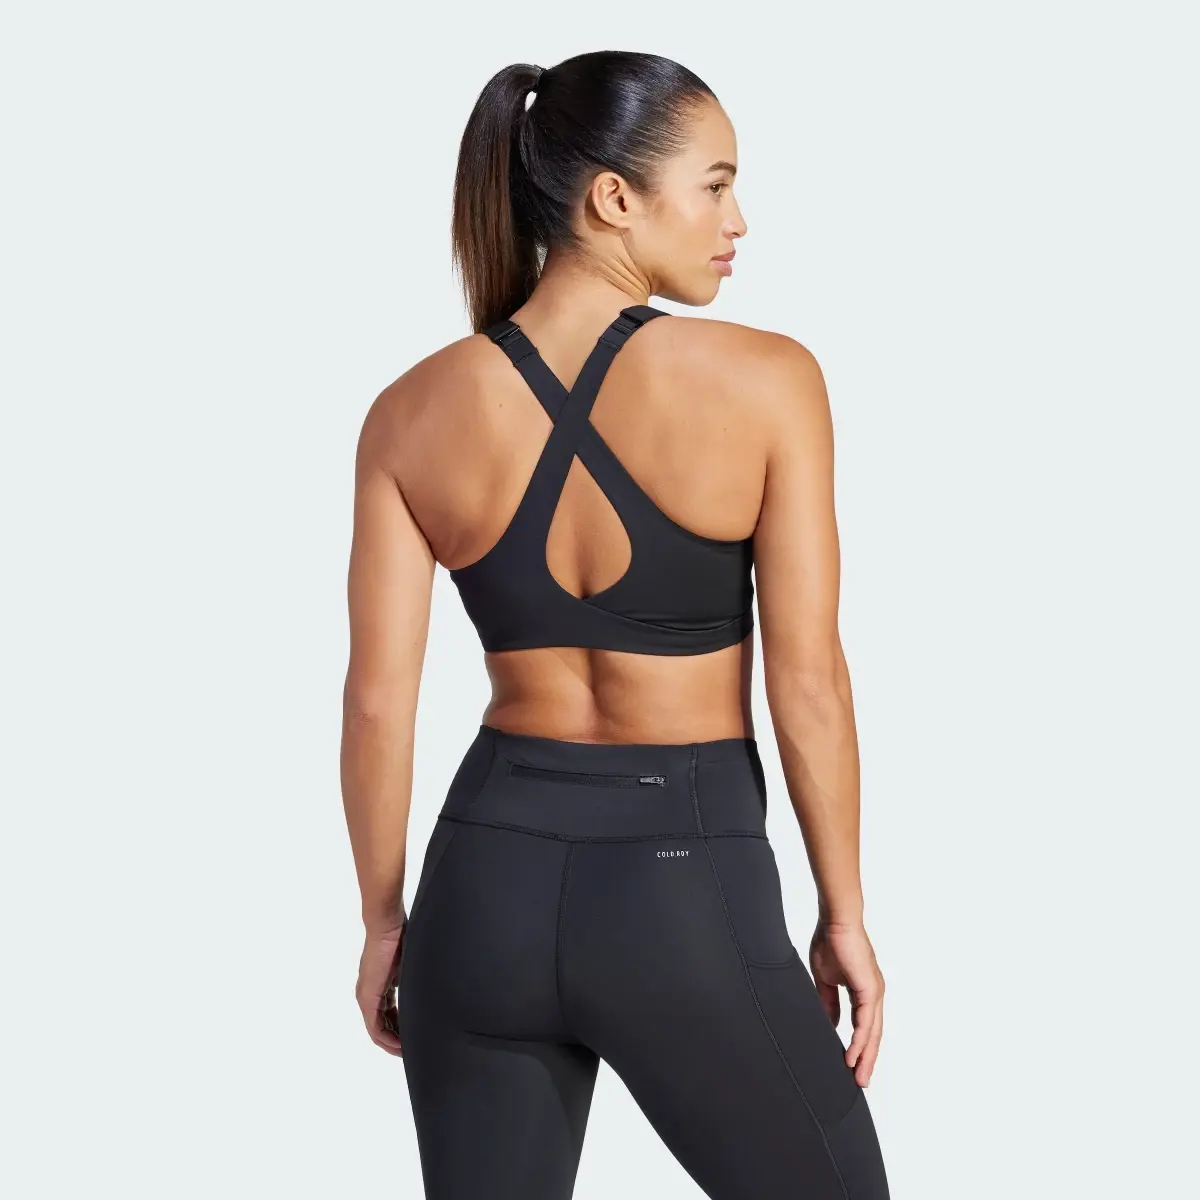 Adidas Brassière Collective Power Fastimpact Luxe Maintien fort. 3